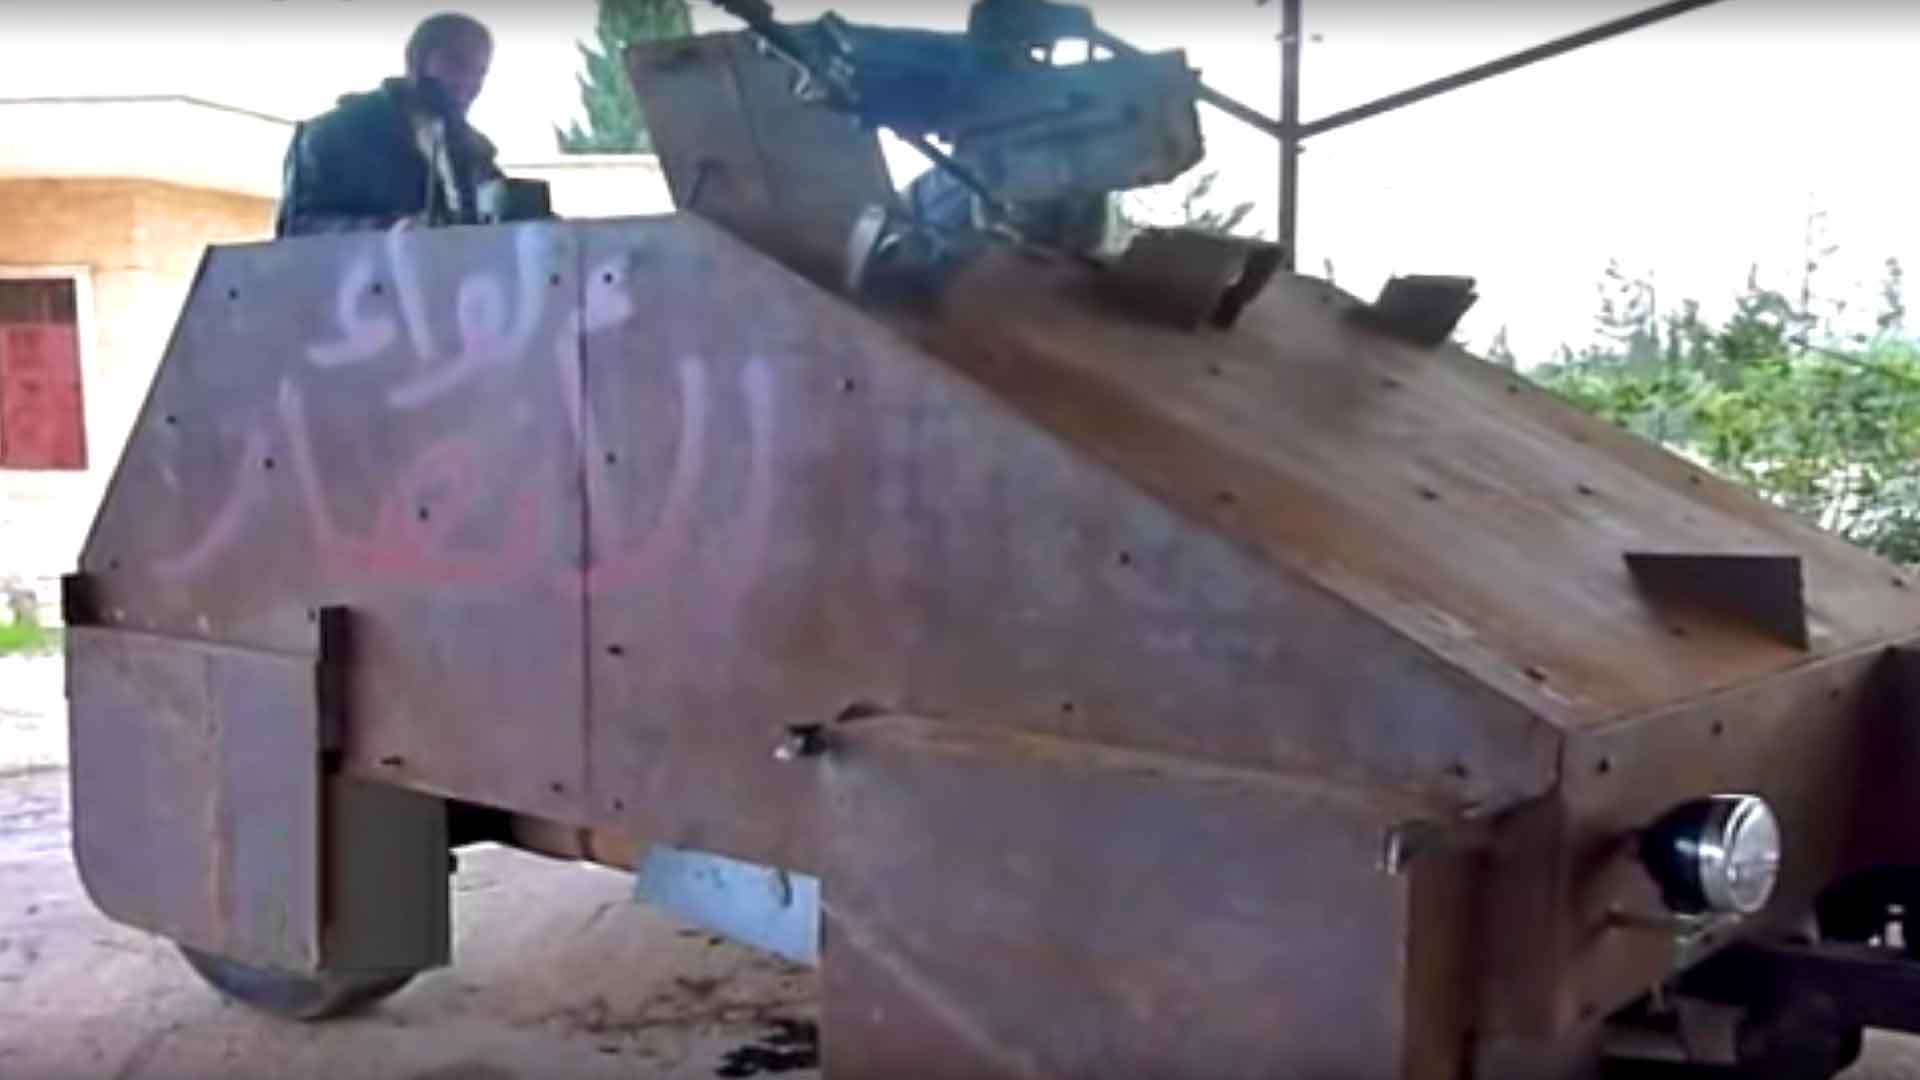 How The Sony Playstation Helped Weaponize DIY Tanks for Syrian Rebels